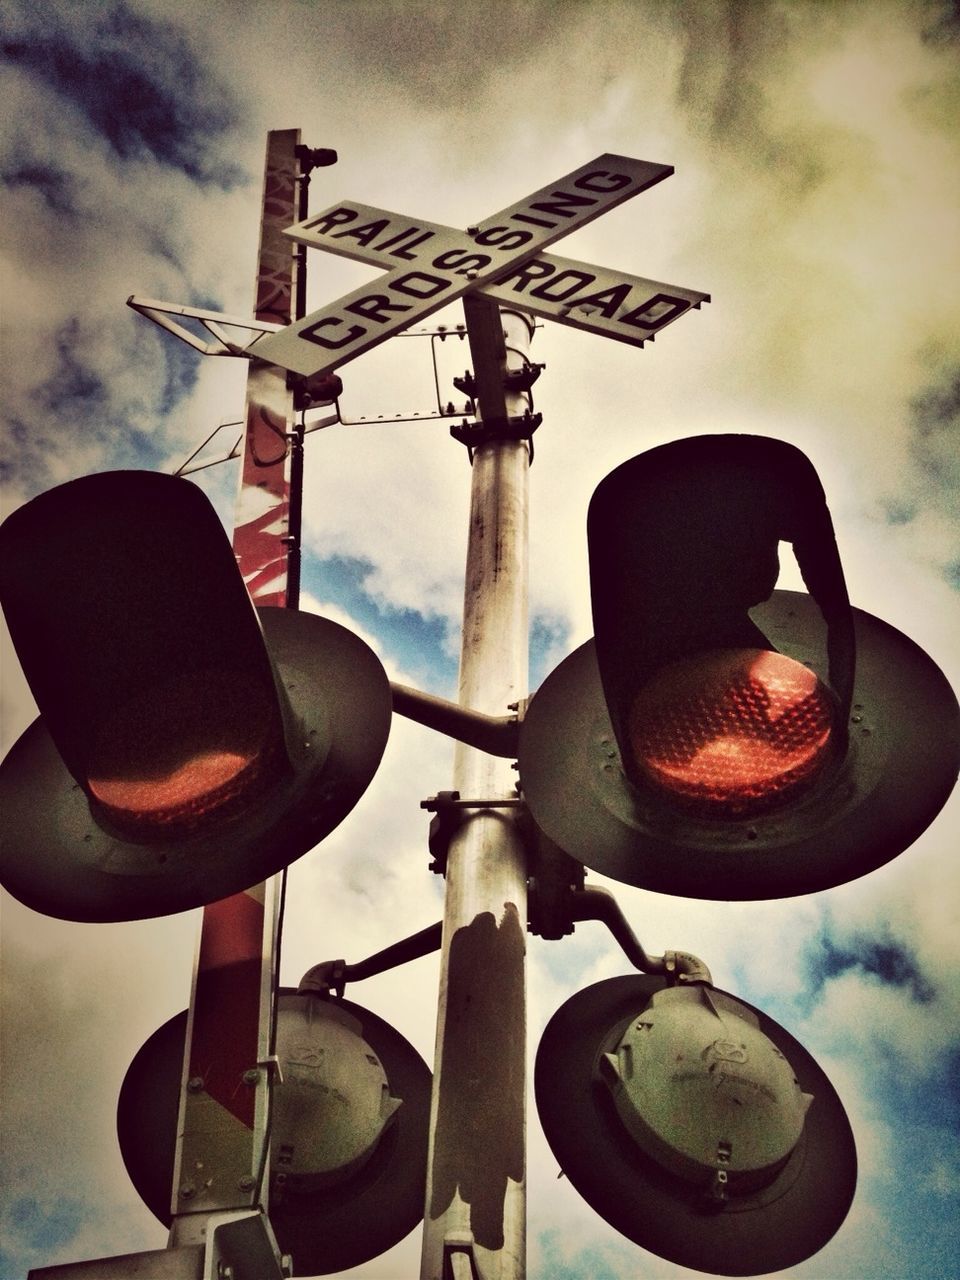 Railway crossing sign and stop light against sky